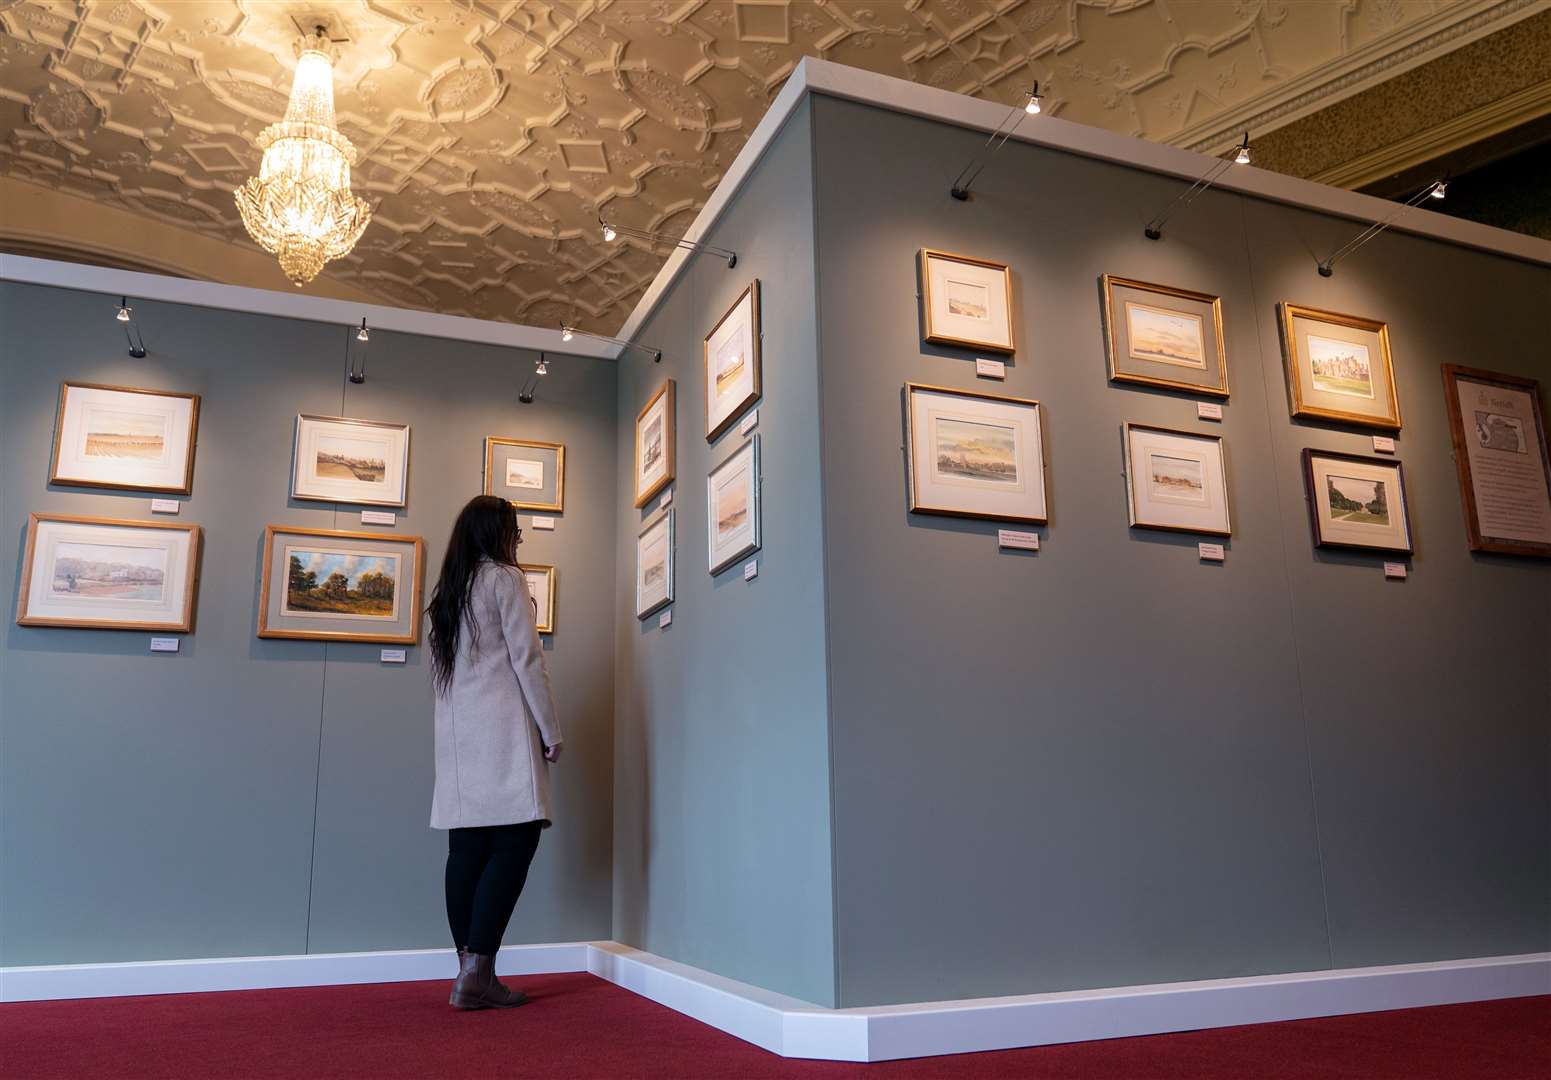 The exhibition will be on show at Sandringham House in Norfolk (Joe Giddens/PA)